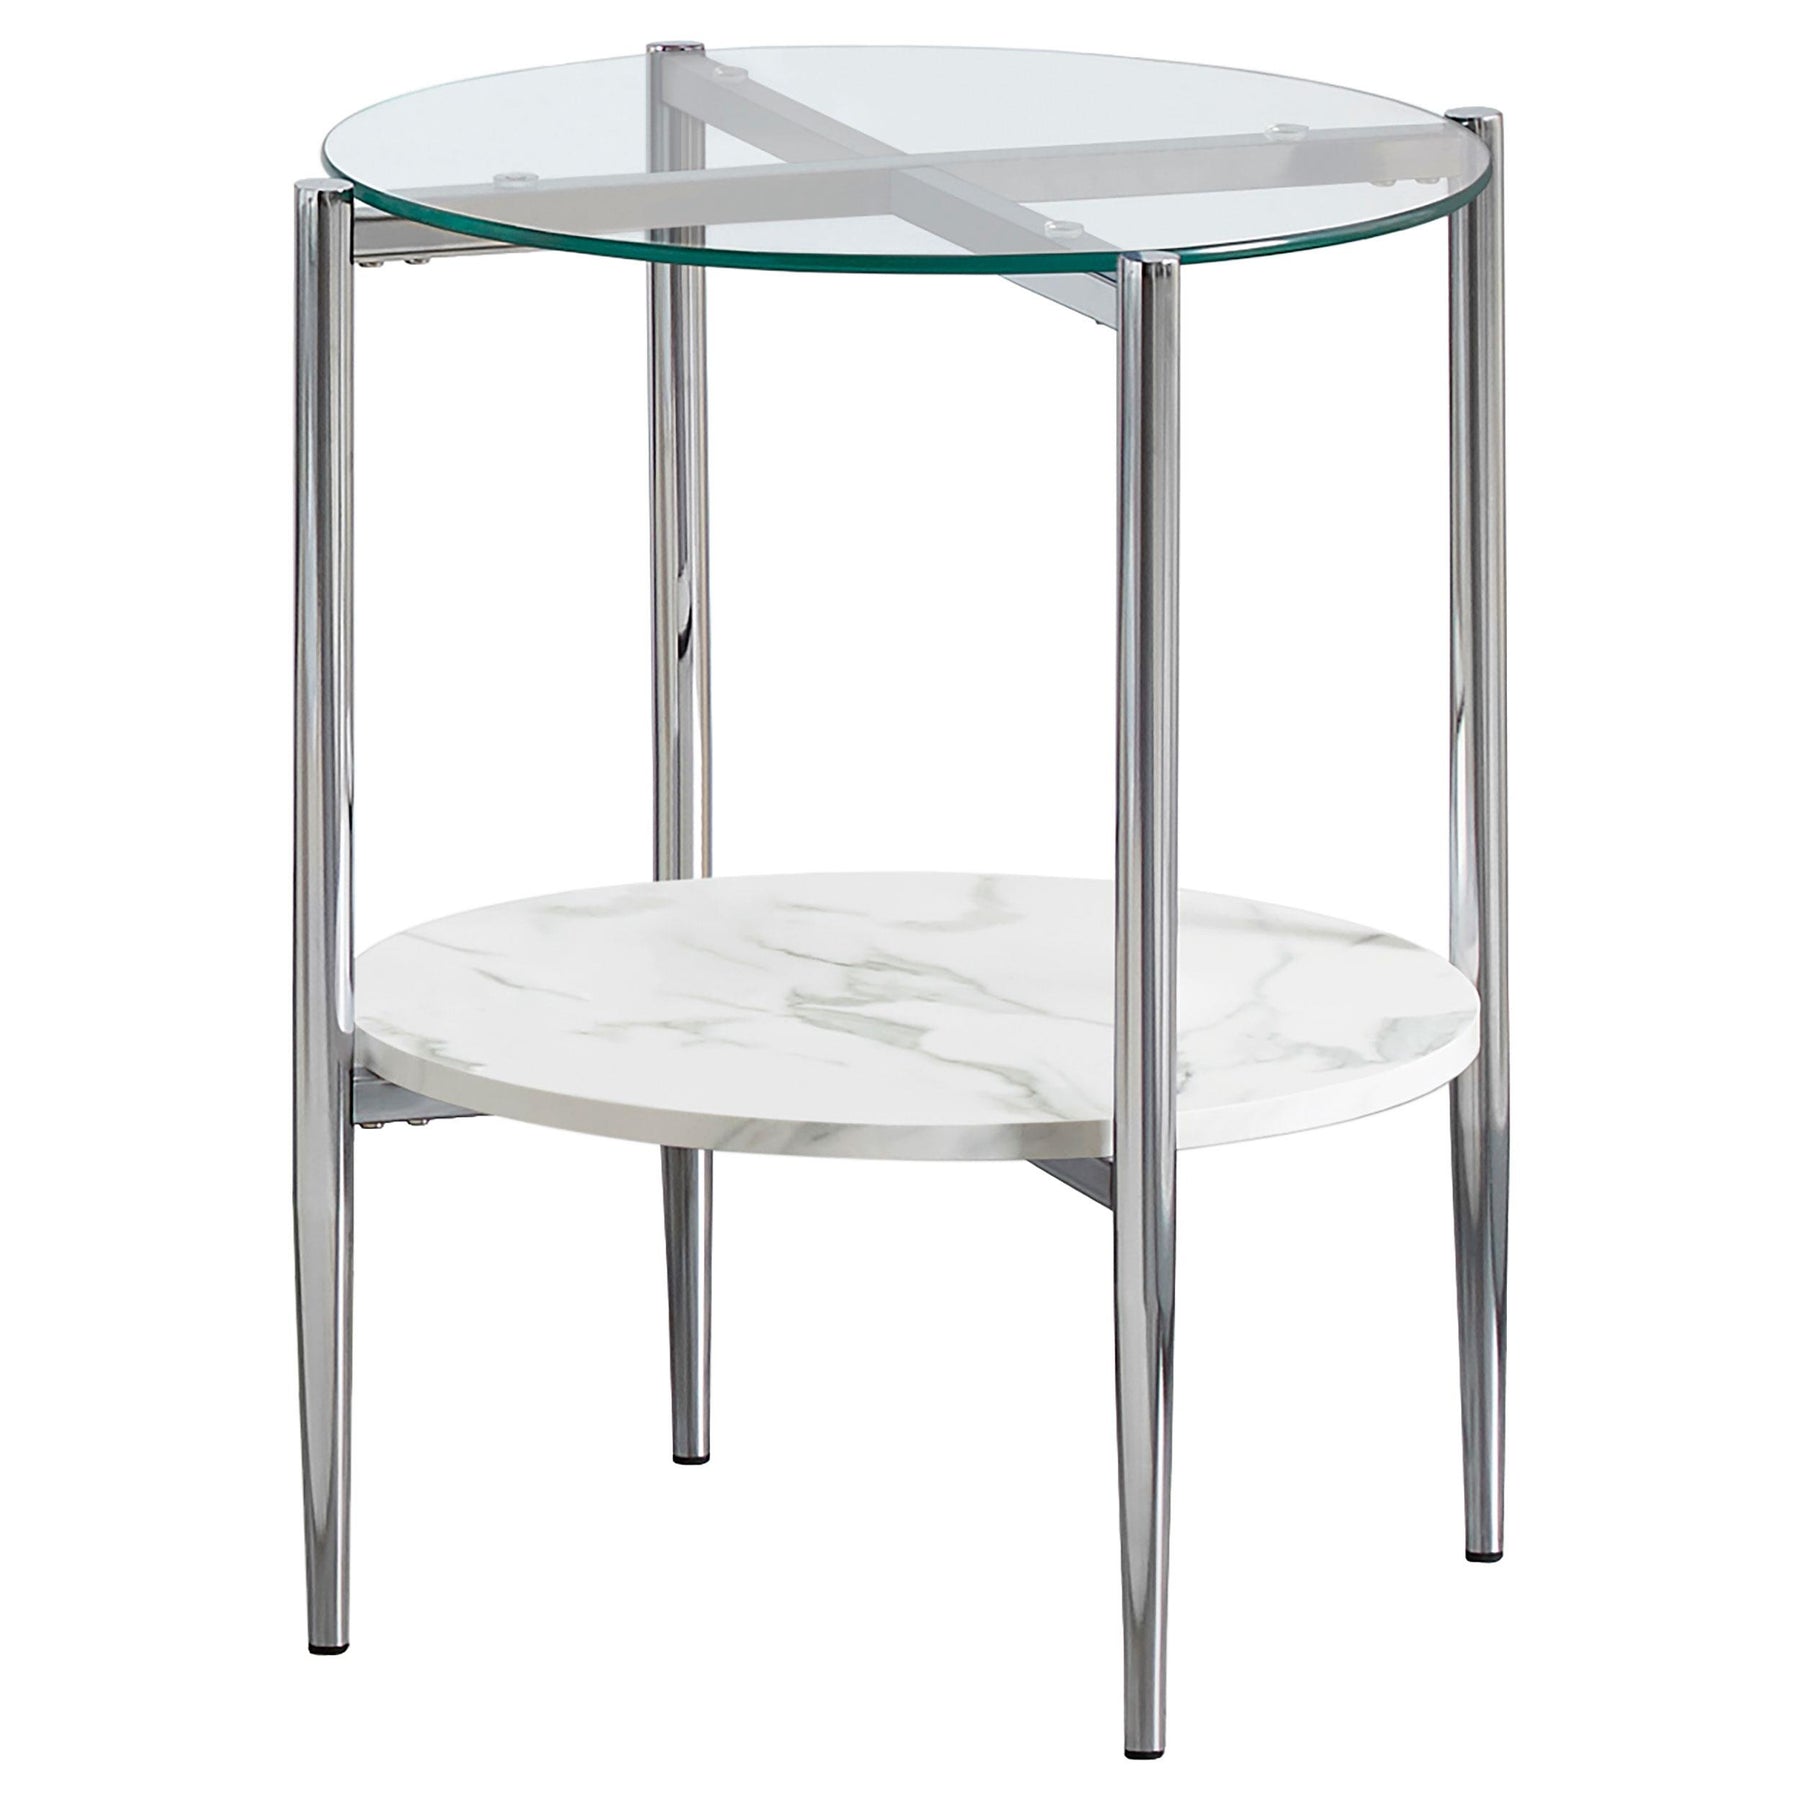 Cadee Round Glass Top End Table Clear and Chrome Cadee Round Glass Top End Table Clear and Chrome Half Price Furniture